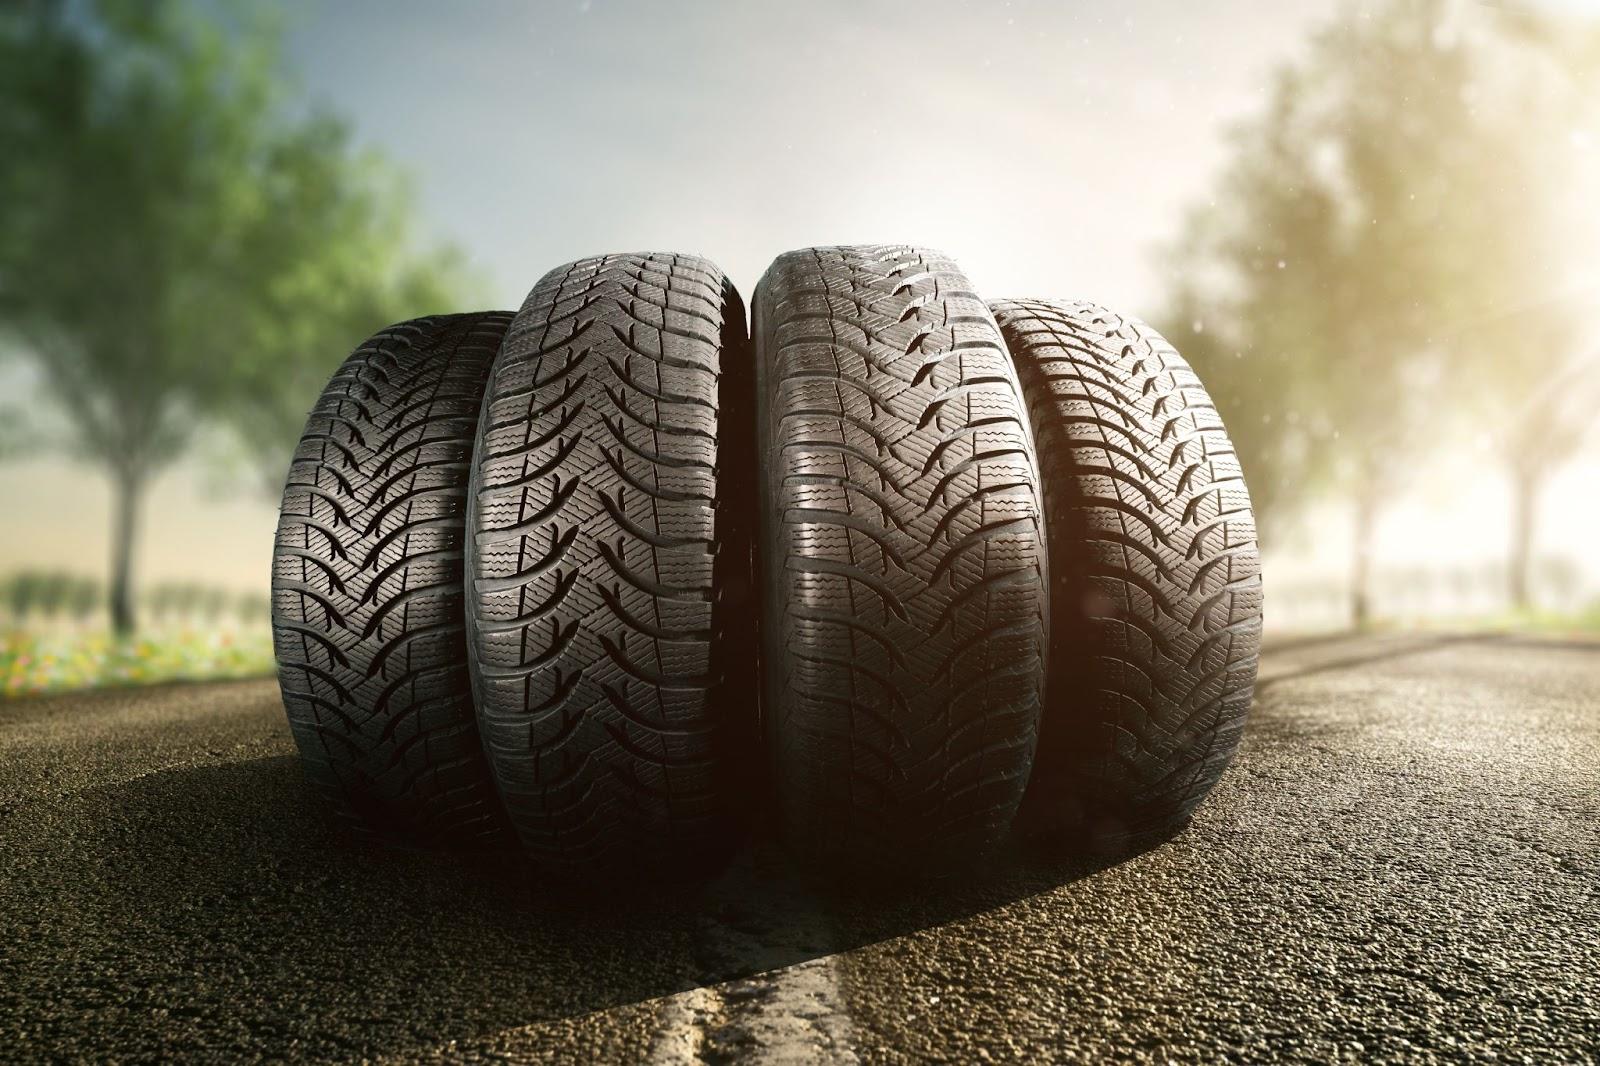 A close-up of a tire

Description automatically generated with medium confidence